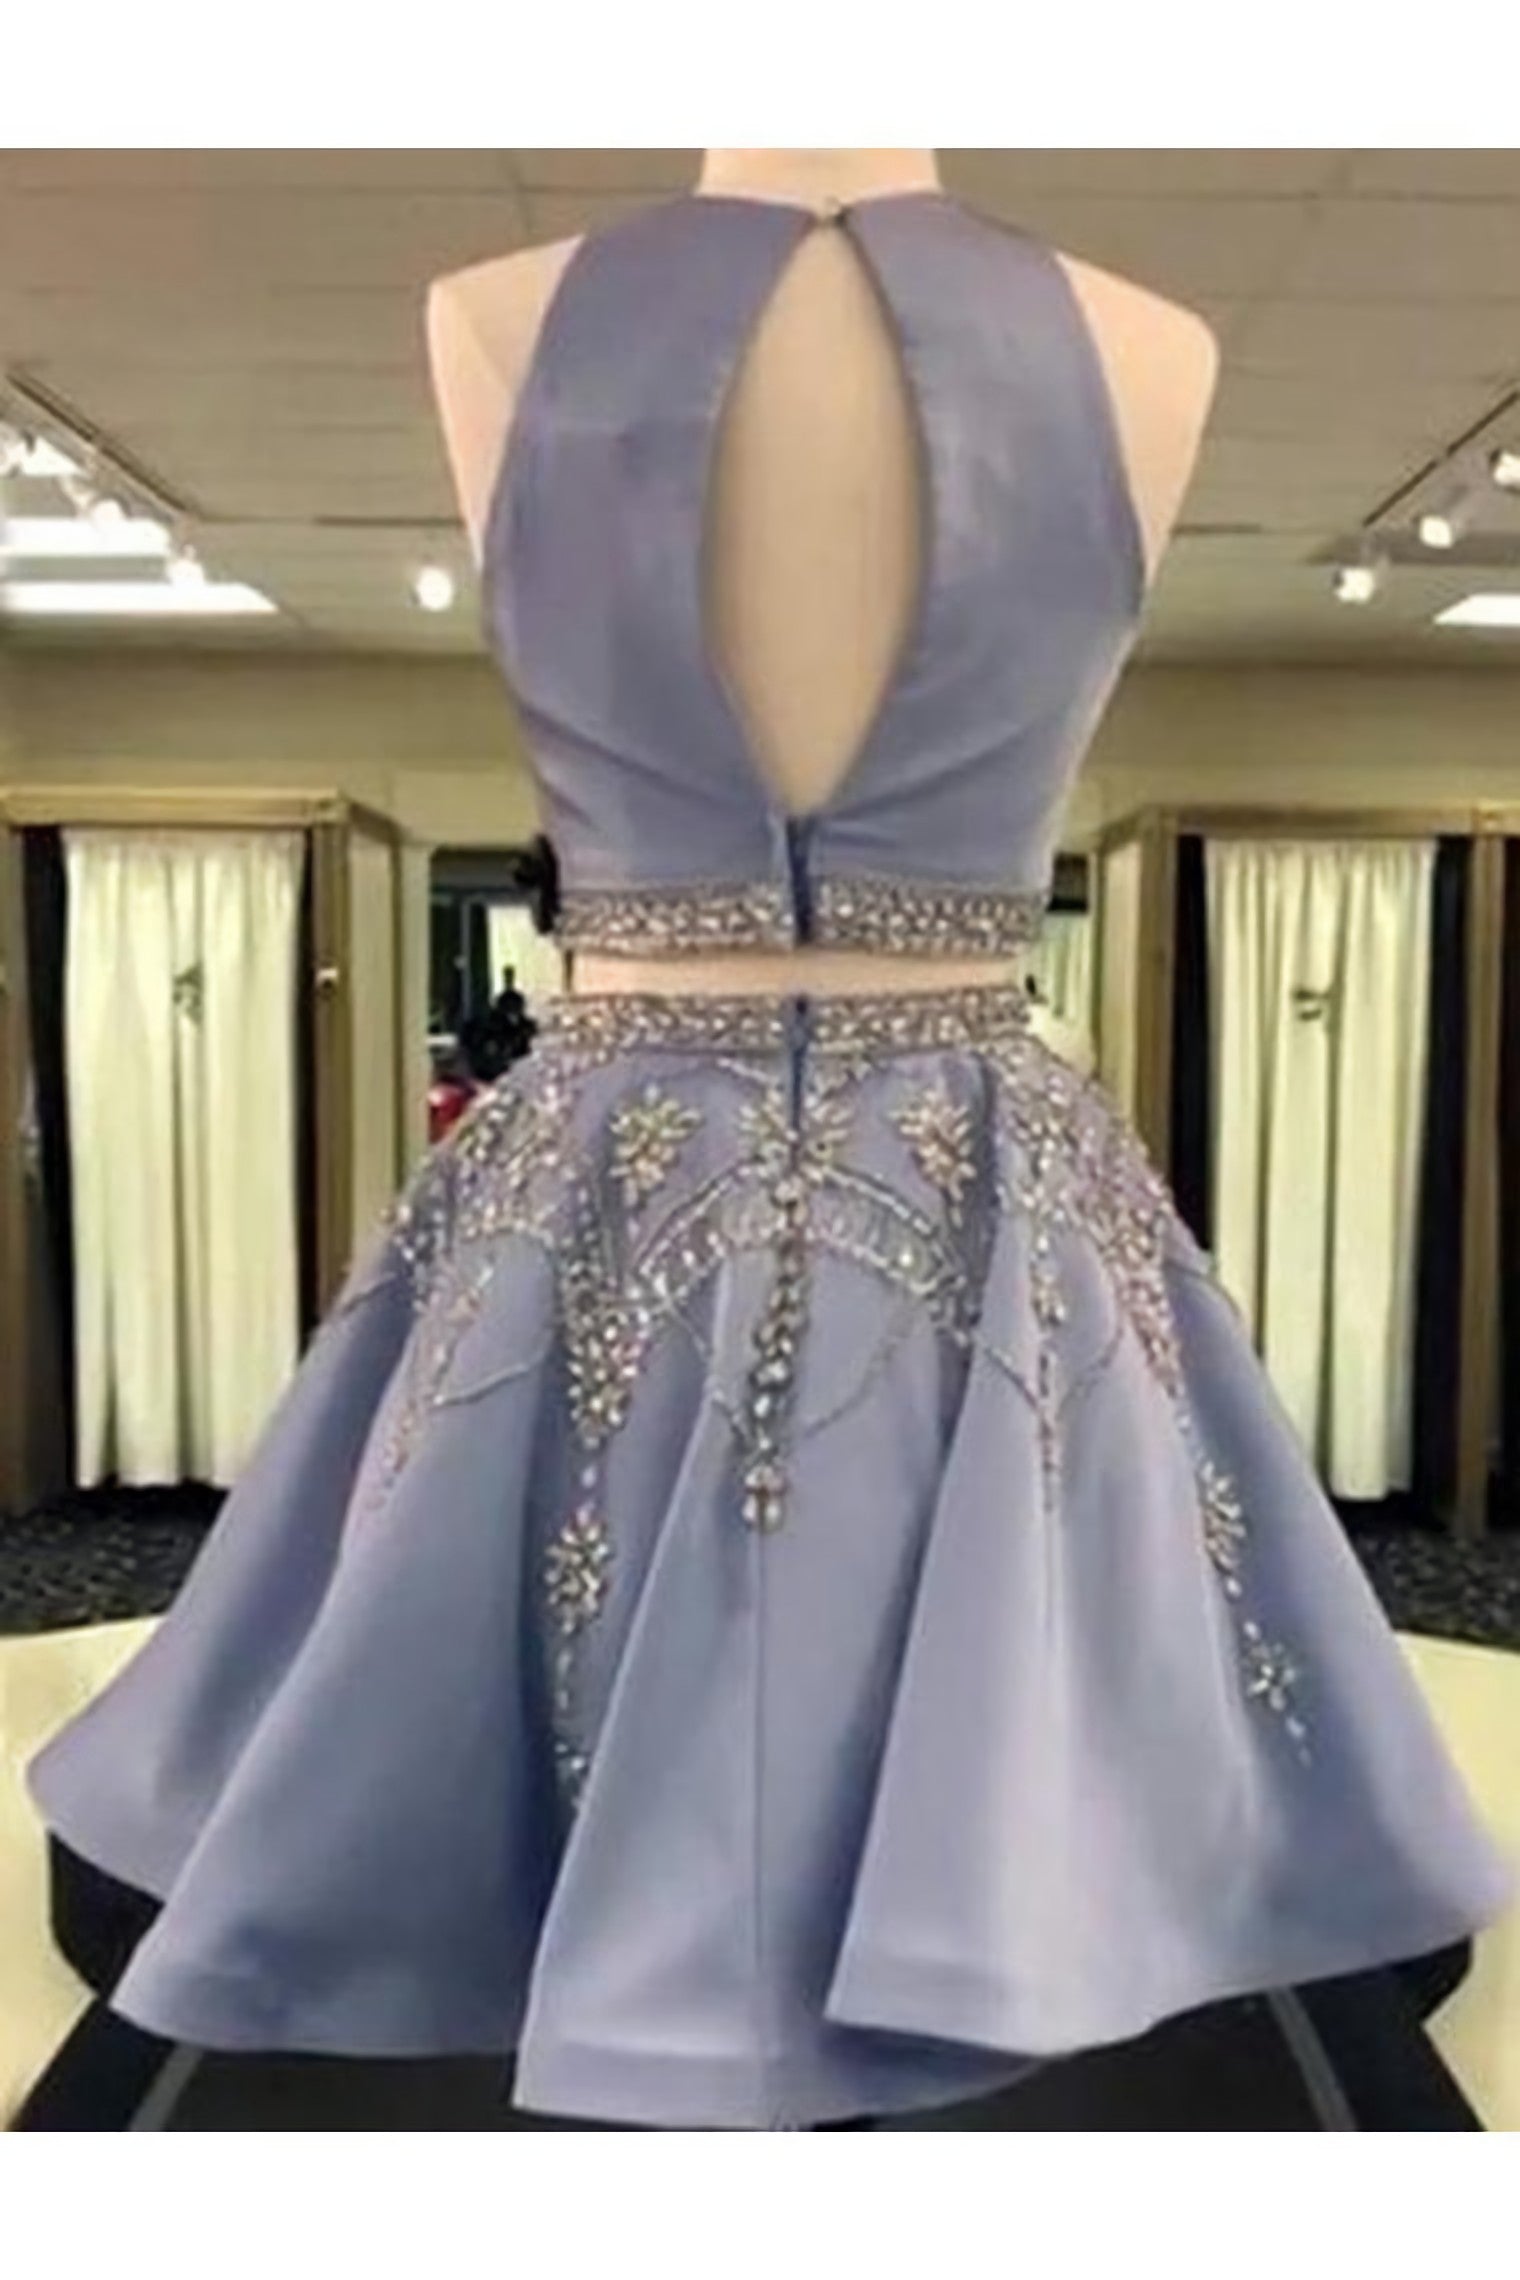 Long Dress Formal, A Line 2 Pieces Beaded Satin Short Homecoming Dresses, Scoop